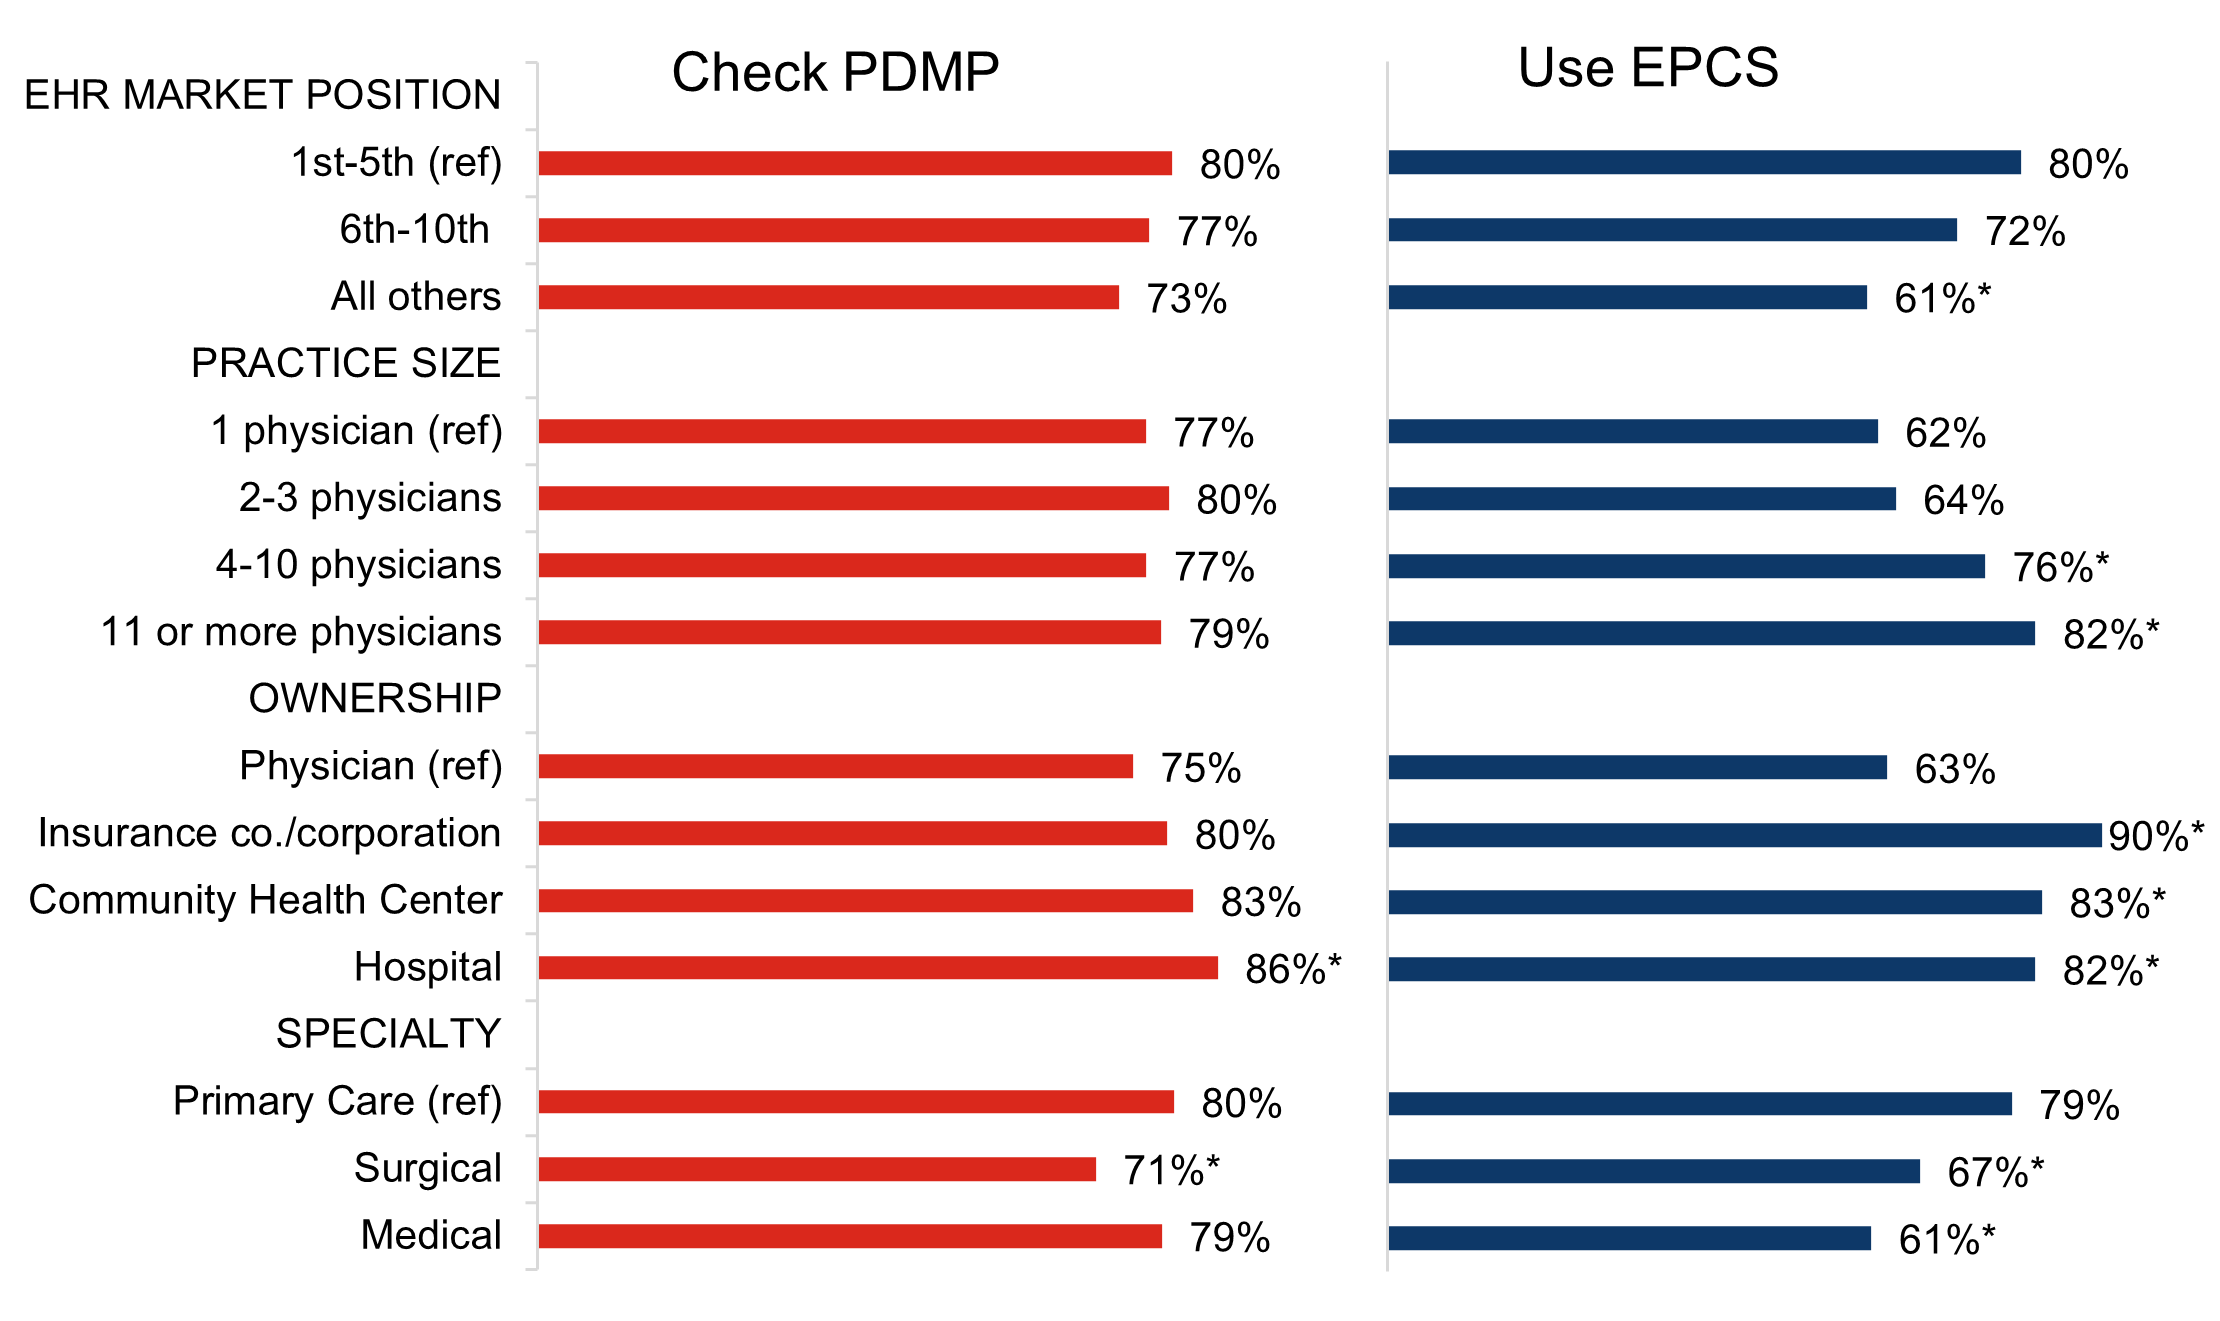 This figure contains a horizontal clustered bar chart that illustrates the percent of physician prescribers of controlled substances who reported they check the PDMP (left panel) and use EPCS (right panel) in 2021, by practice characteristics.  In the left panel, compared to 80 percent of physicians with an EHR vendor in the 1st to 5th market position, 77 percent of physicians with an EHR vendor in the 6th to 10th market position and 73 percent with all other vendors checked the PDMP in 2021. Compared to 77 percent of physicians in a solo practice, 80 percent of physicians in a practice with 2 to 3 physicians, 77 percent in a practice with 4 to 10 physicians, and 79 percent in a practice with 11 or more physicians checked the PDMP in 2021. Compared to 75 percent of physicians in a physician-owned practice, 80 percent of physicians in insurance company/corporation owned practices, 83 percent in community health center owned practices, and 86 percent in hospital owned practices (a statistically significant difference) checked the PDMP in 2021. Compared to 80 percent of primary care physicians, 71 percent of surgical specialists (a statistically significant difference) and 79 percent of medical specialists checked the PDMP in 2021.  In the right panel, compared to 80 percent of physicians with an EHR vendor in the 1st to 5th market position, 72 percent of physicians with an EHR vendor in the 6th to 10th market position and 61 percent with all other vendors (a statistically significant difference) used EPCS in 2021. Compared to 62 percent of physicians in a solo practice, 64 percent of physicians in a practice with 2 to 3 physicians, 76 percent in a practice with 4 to 10 physicians (a statistically significant difference), and 82 percent in a practice with 11 or more physicians (a statistically significant difference) used EPCS in 2021. Compared to 63 percent of physicians in a physician-owned practice, 90 percent of physicians in insurance company/corporation owned practices, 83 percent in community health center ow